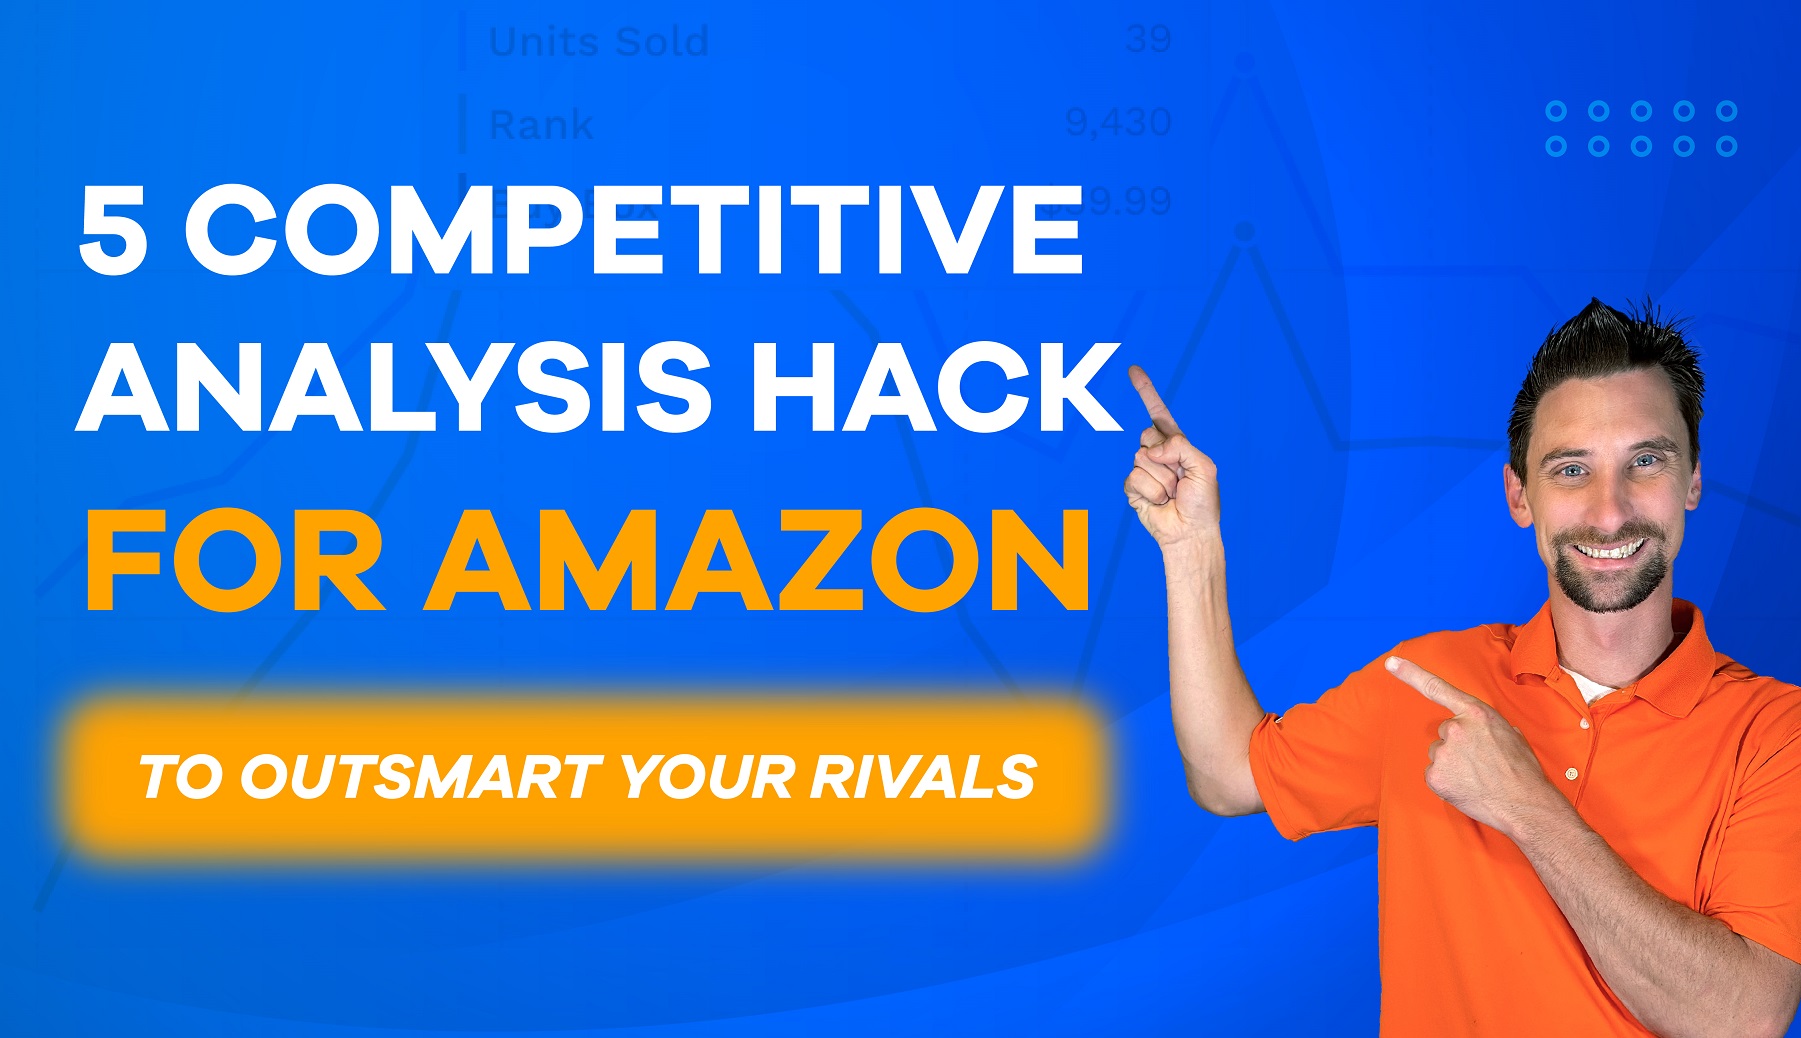 5 Competitive Analysis Hack For Amazon To Outsmart Your Rivals